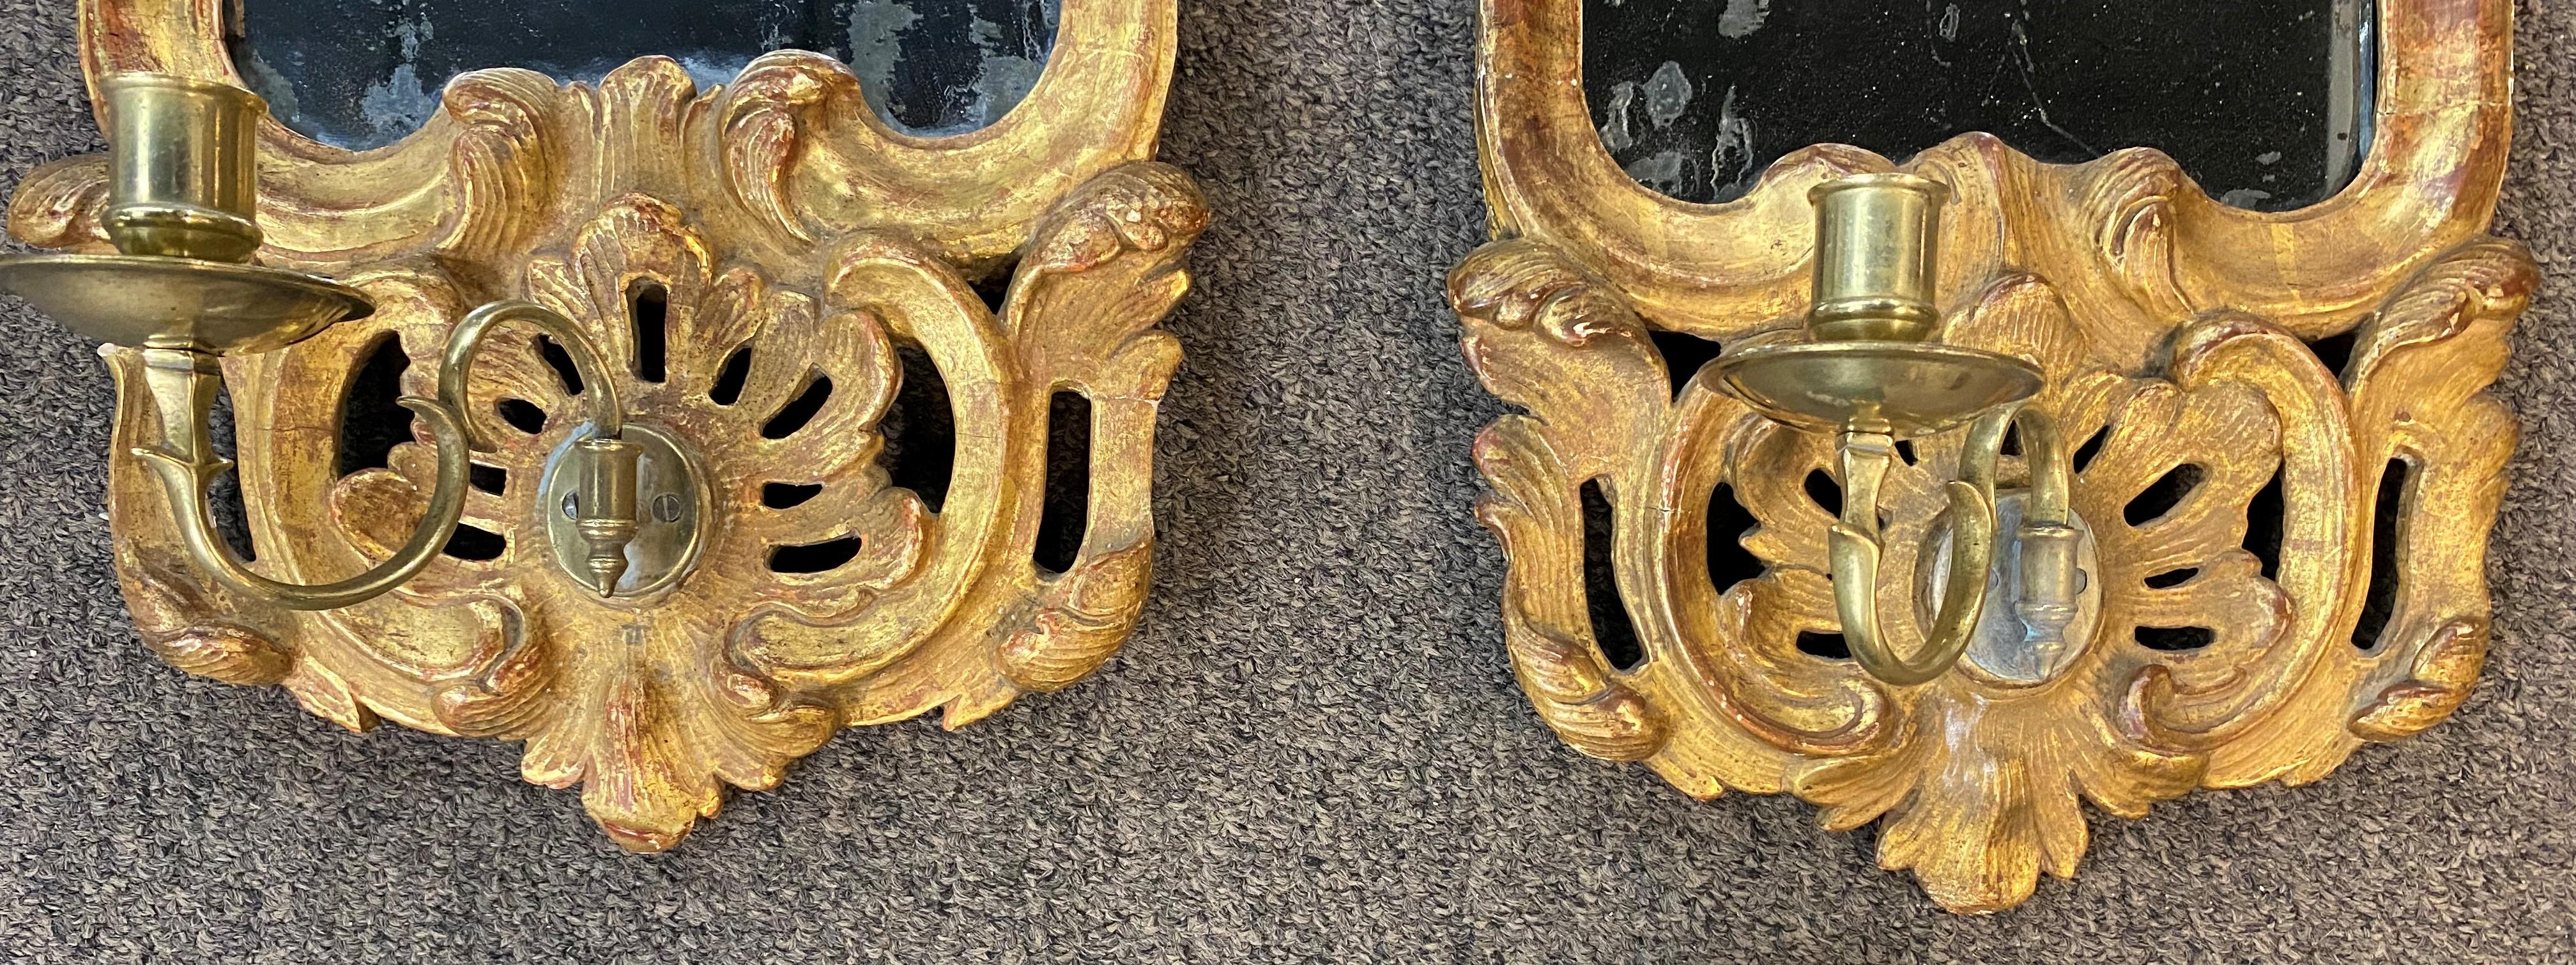 Hand-Carved Exceptional 18th c Pair of Gilded Girandole Mirrored Sconces, Likely Swedish For Sale